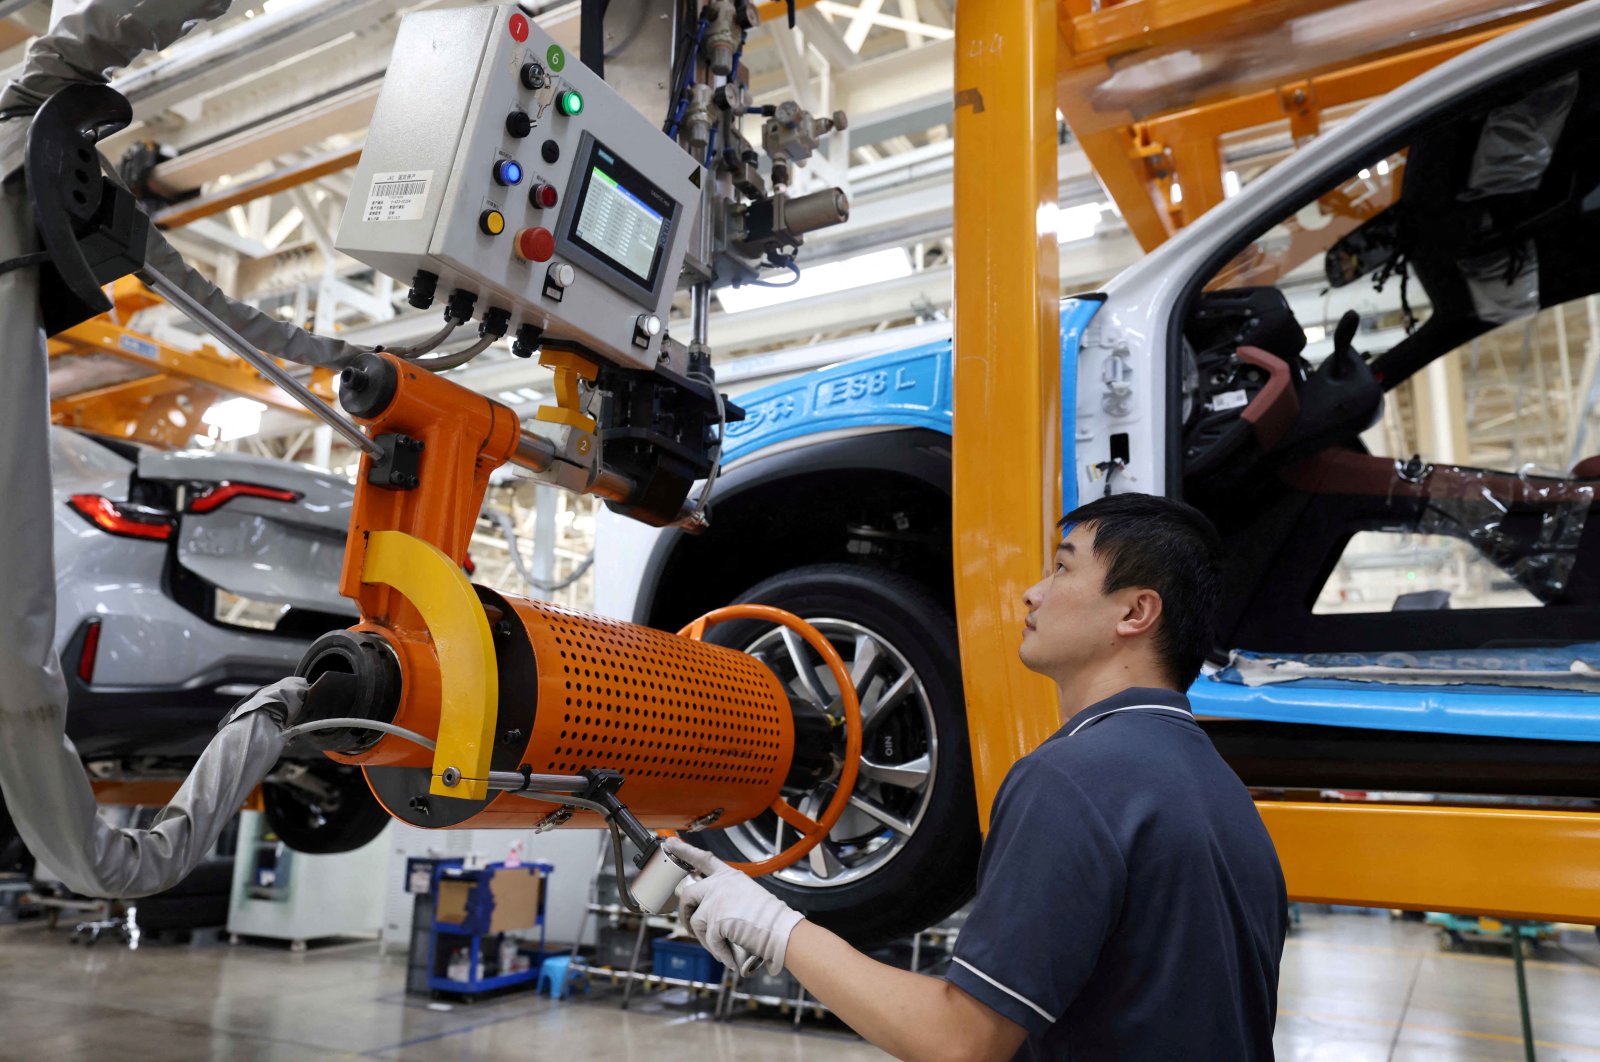 An employee works on the production line of Nio electric vehicles at a JAC-NIO manufacturing plant in Hefei, Anhui province, China, Aug. 28, 2022. (Reuters Photo)